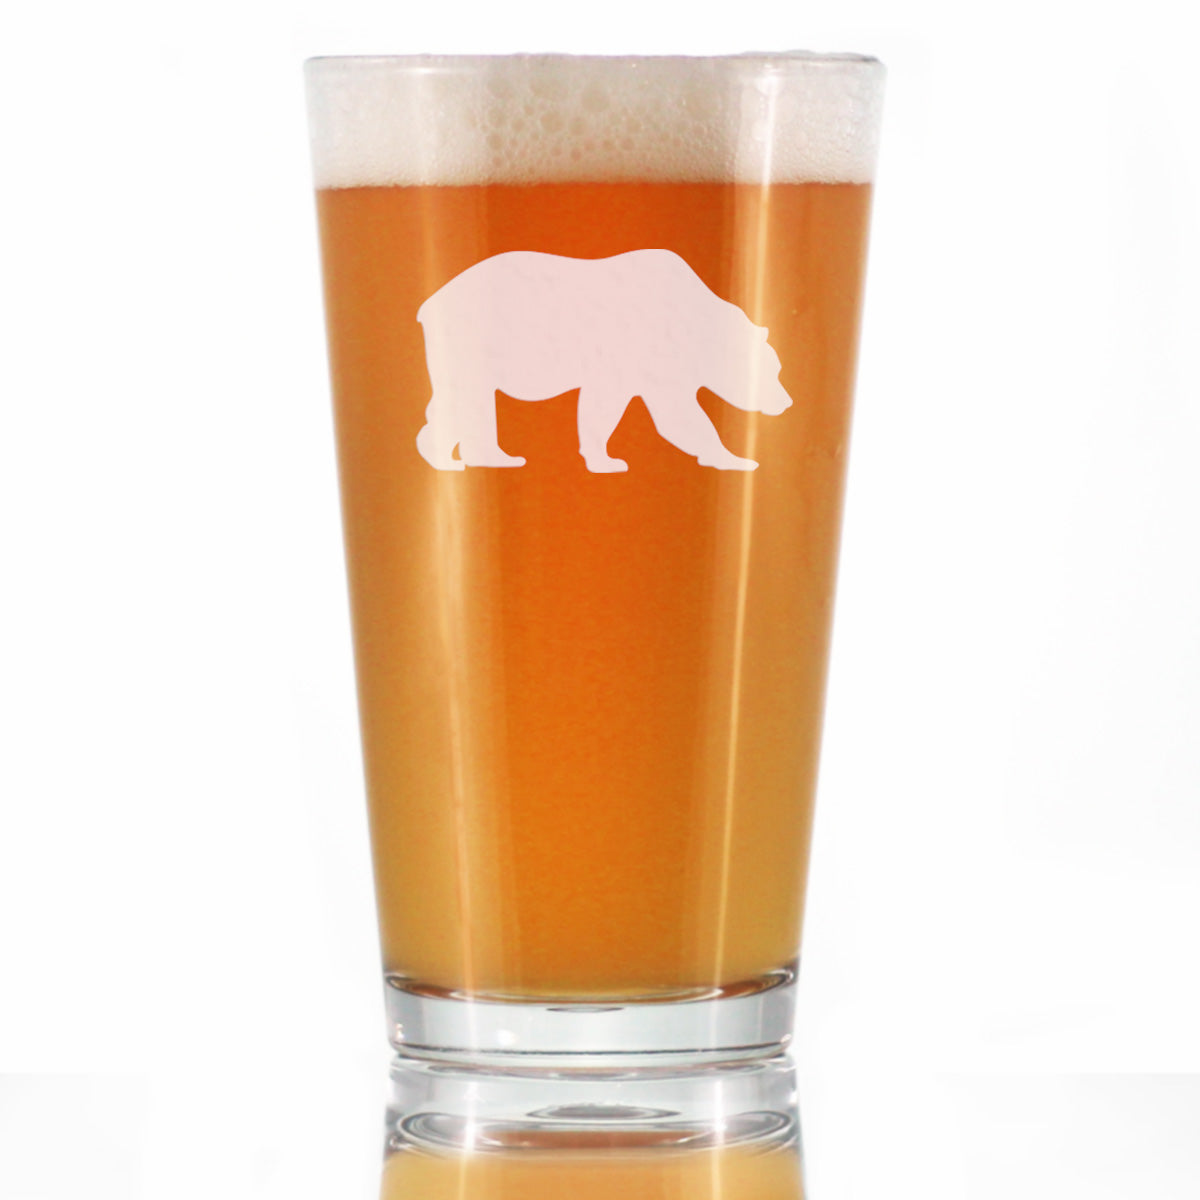 Bear Pint Glass for Beer - Cabin Themed Gifts or Rustic Decor for Men and Women - Fun Drinking or Party Glasses - 16 oz